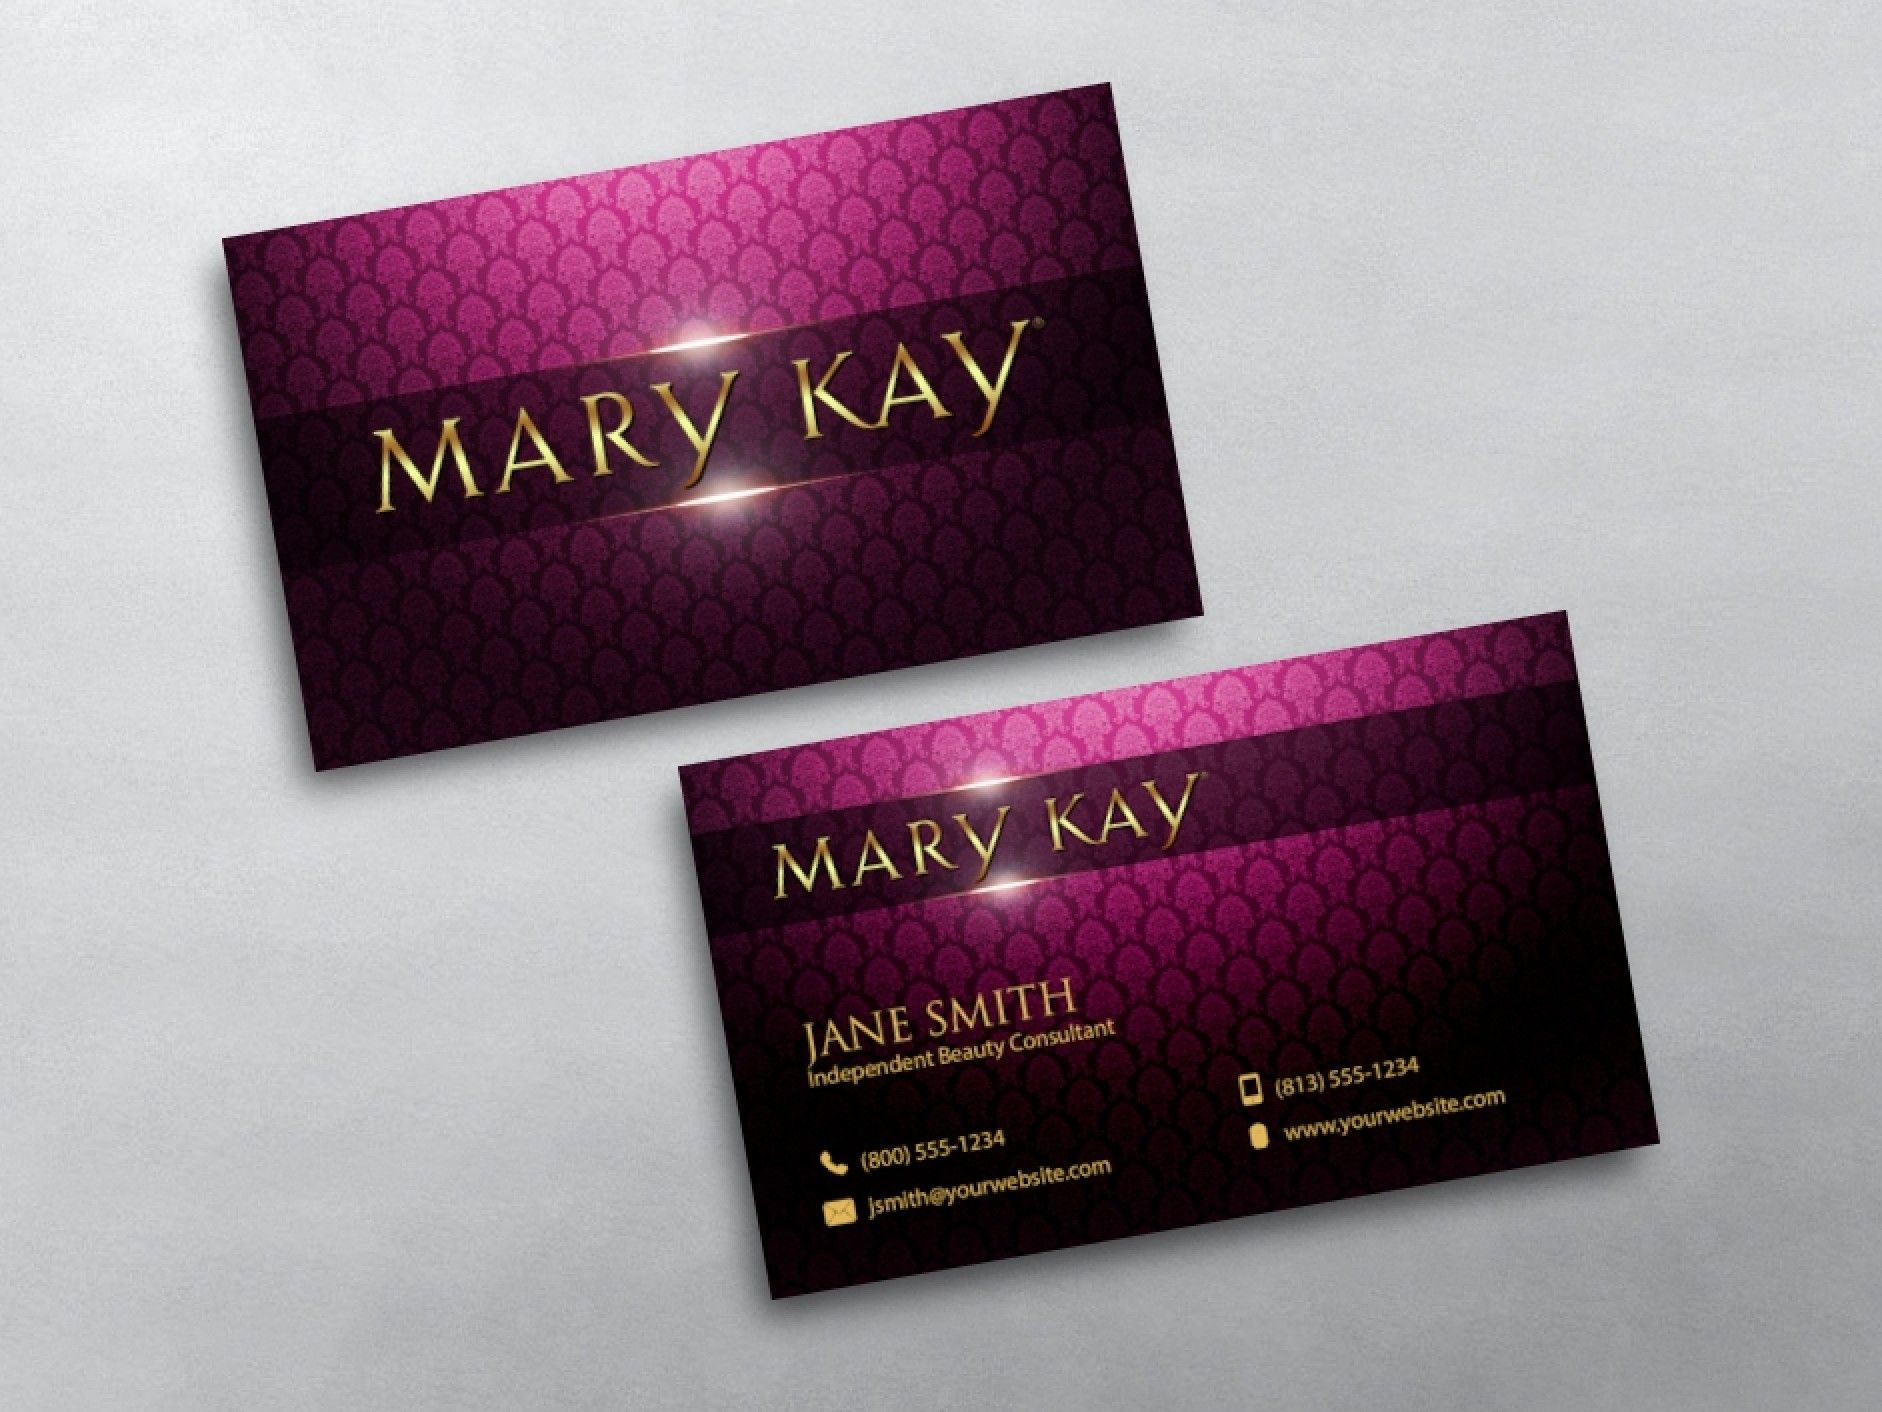 mary kay business cards templates 1